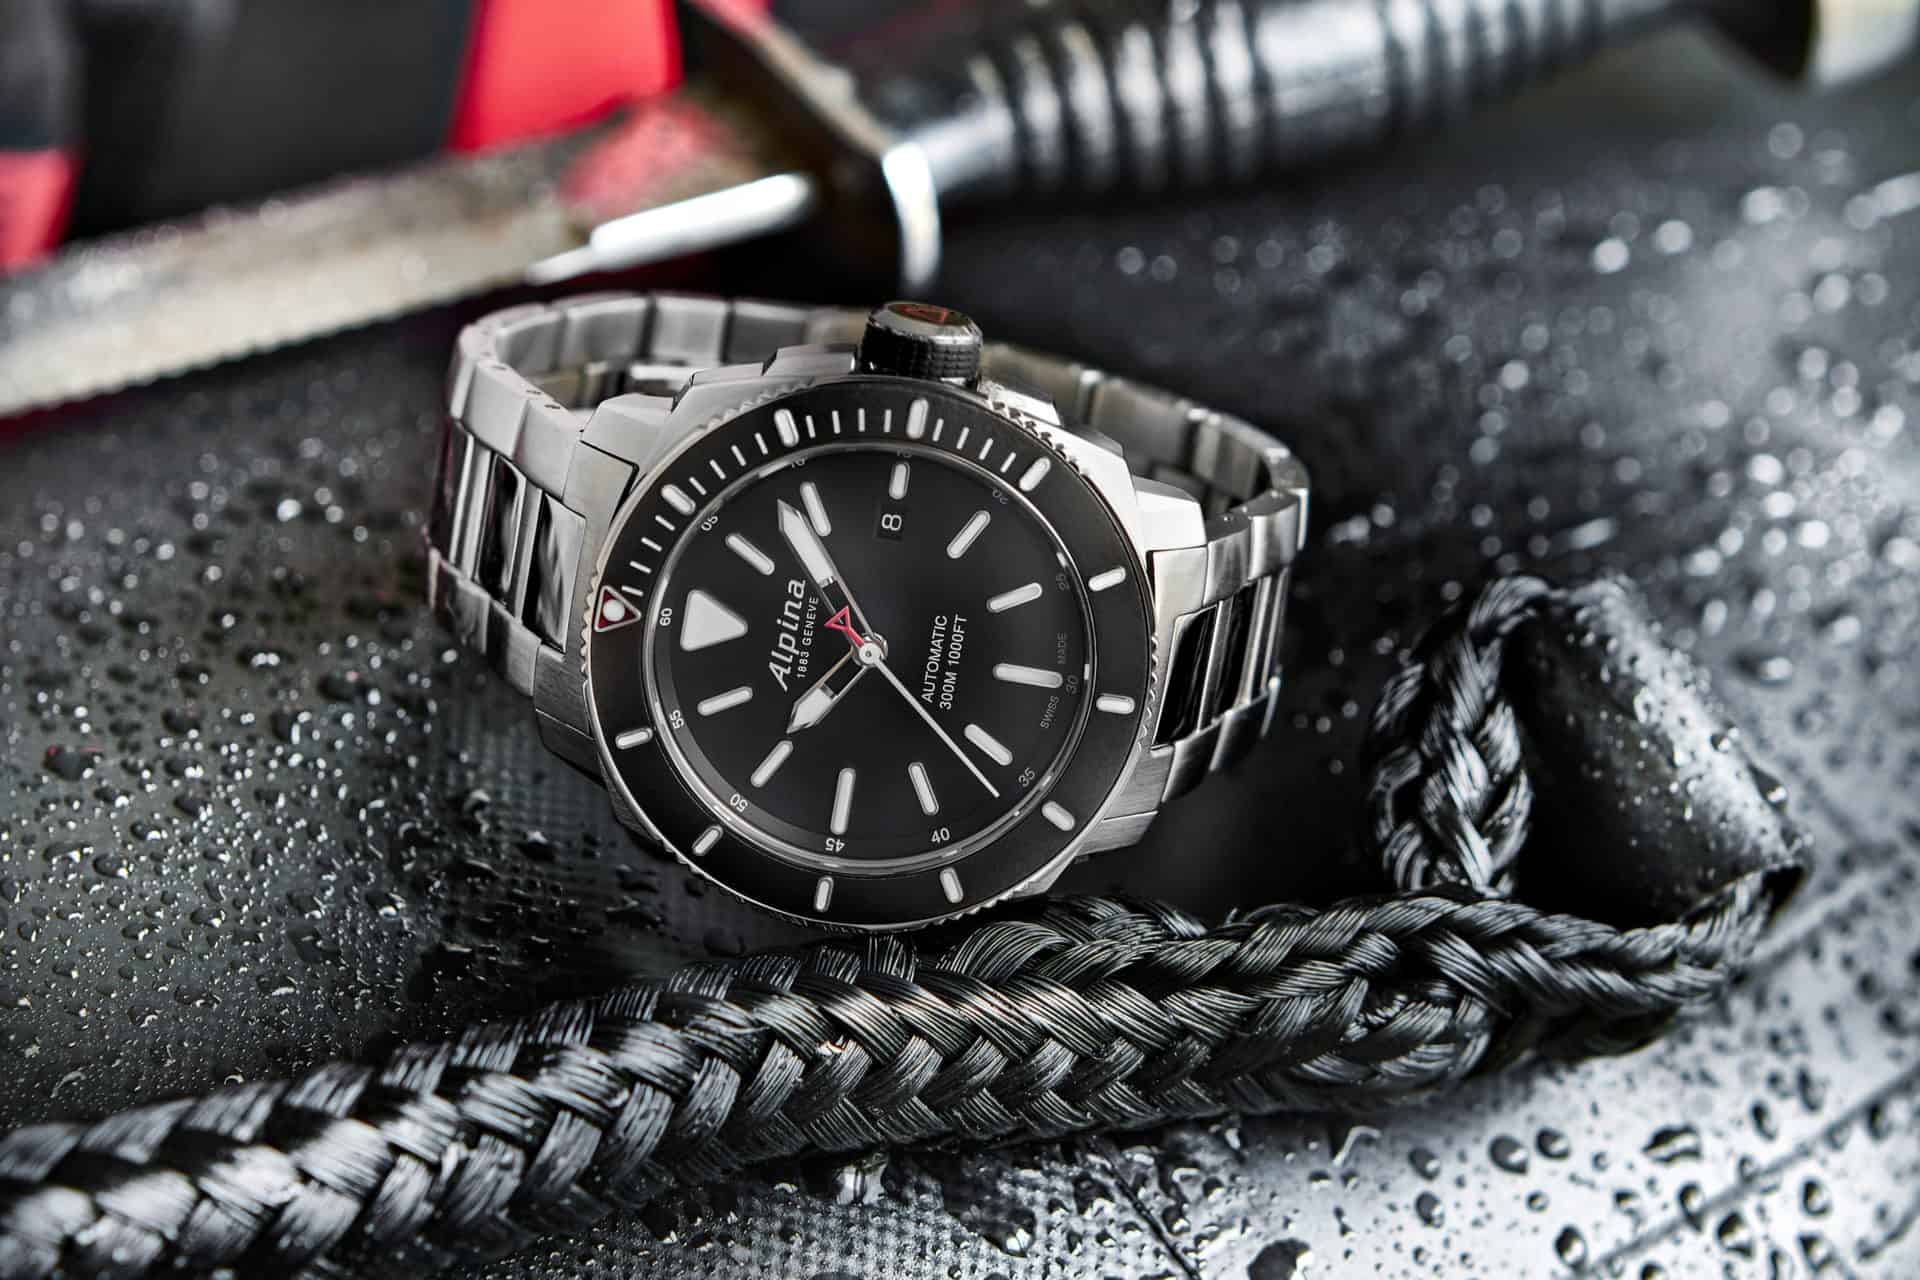 Alpina Seastrong Diver 300 – A Diver’s Must-Have